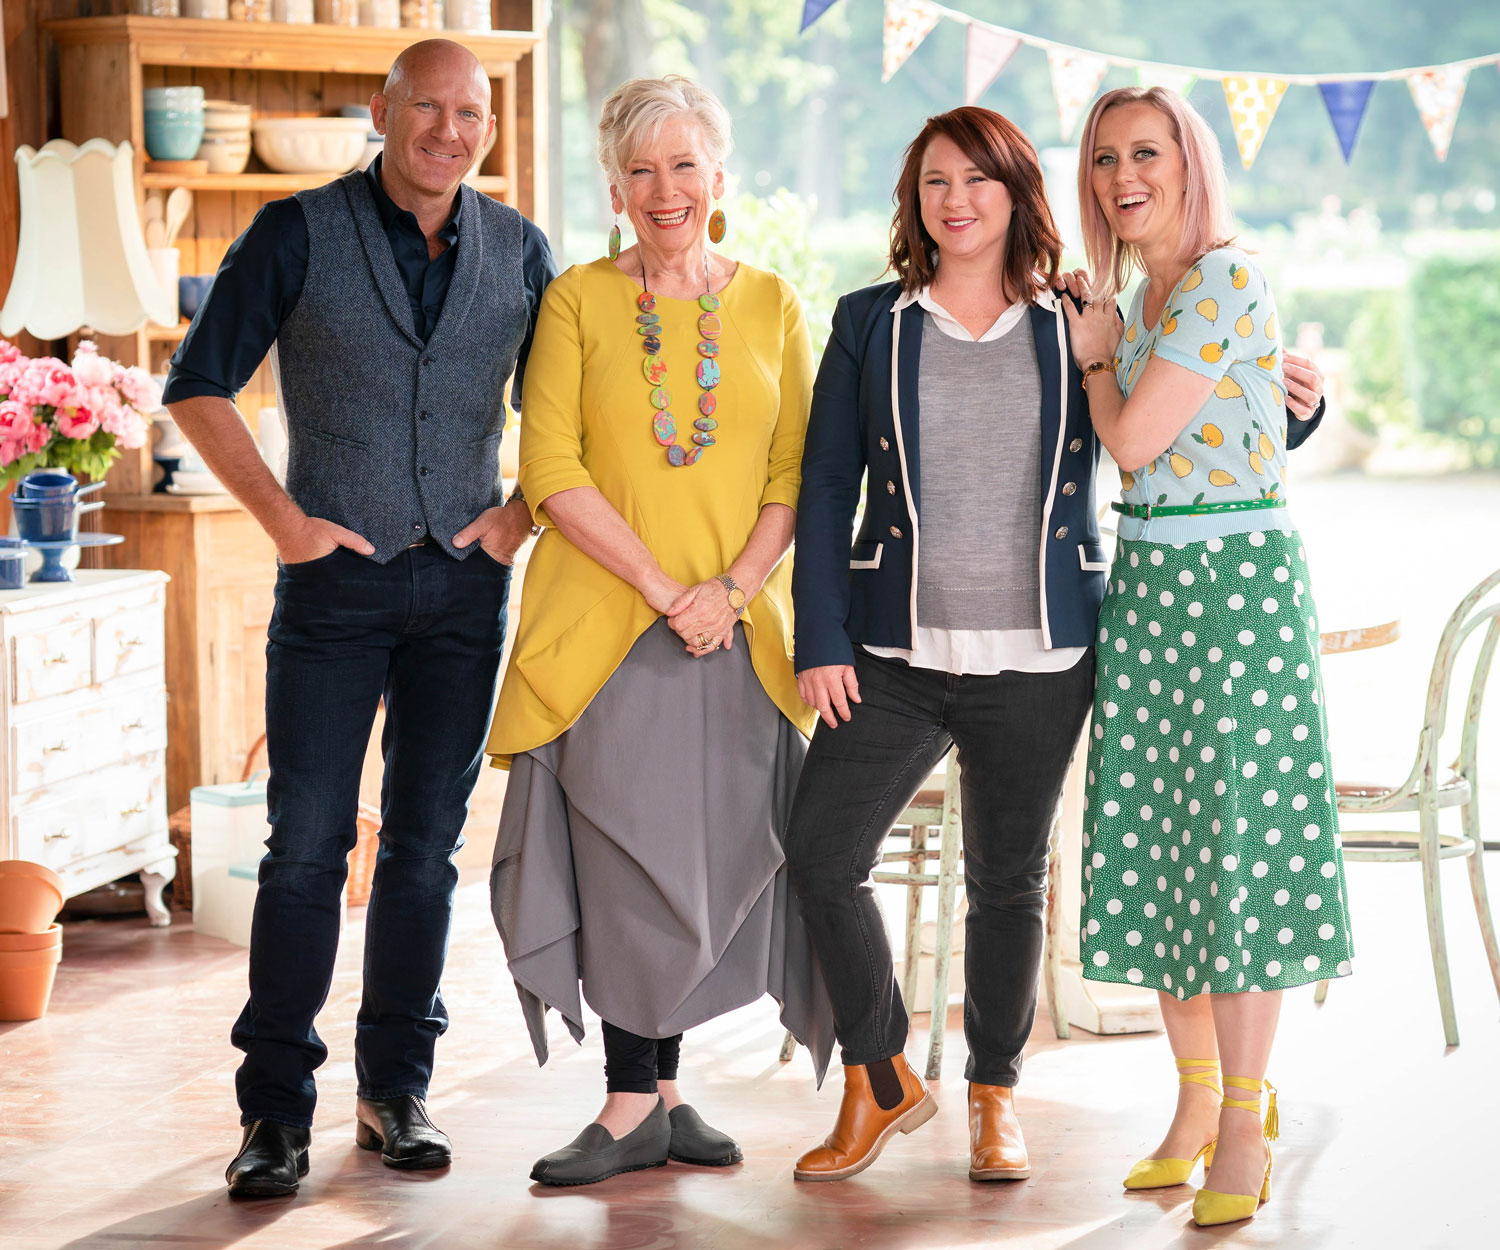 Set Your Timer: The Great Australian Bake Off is back